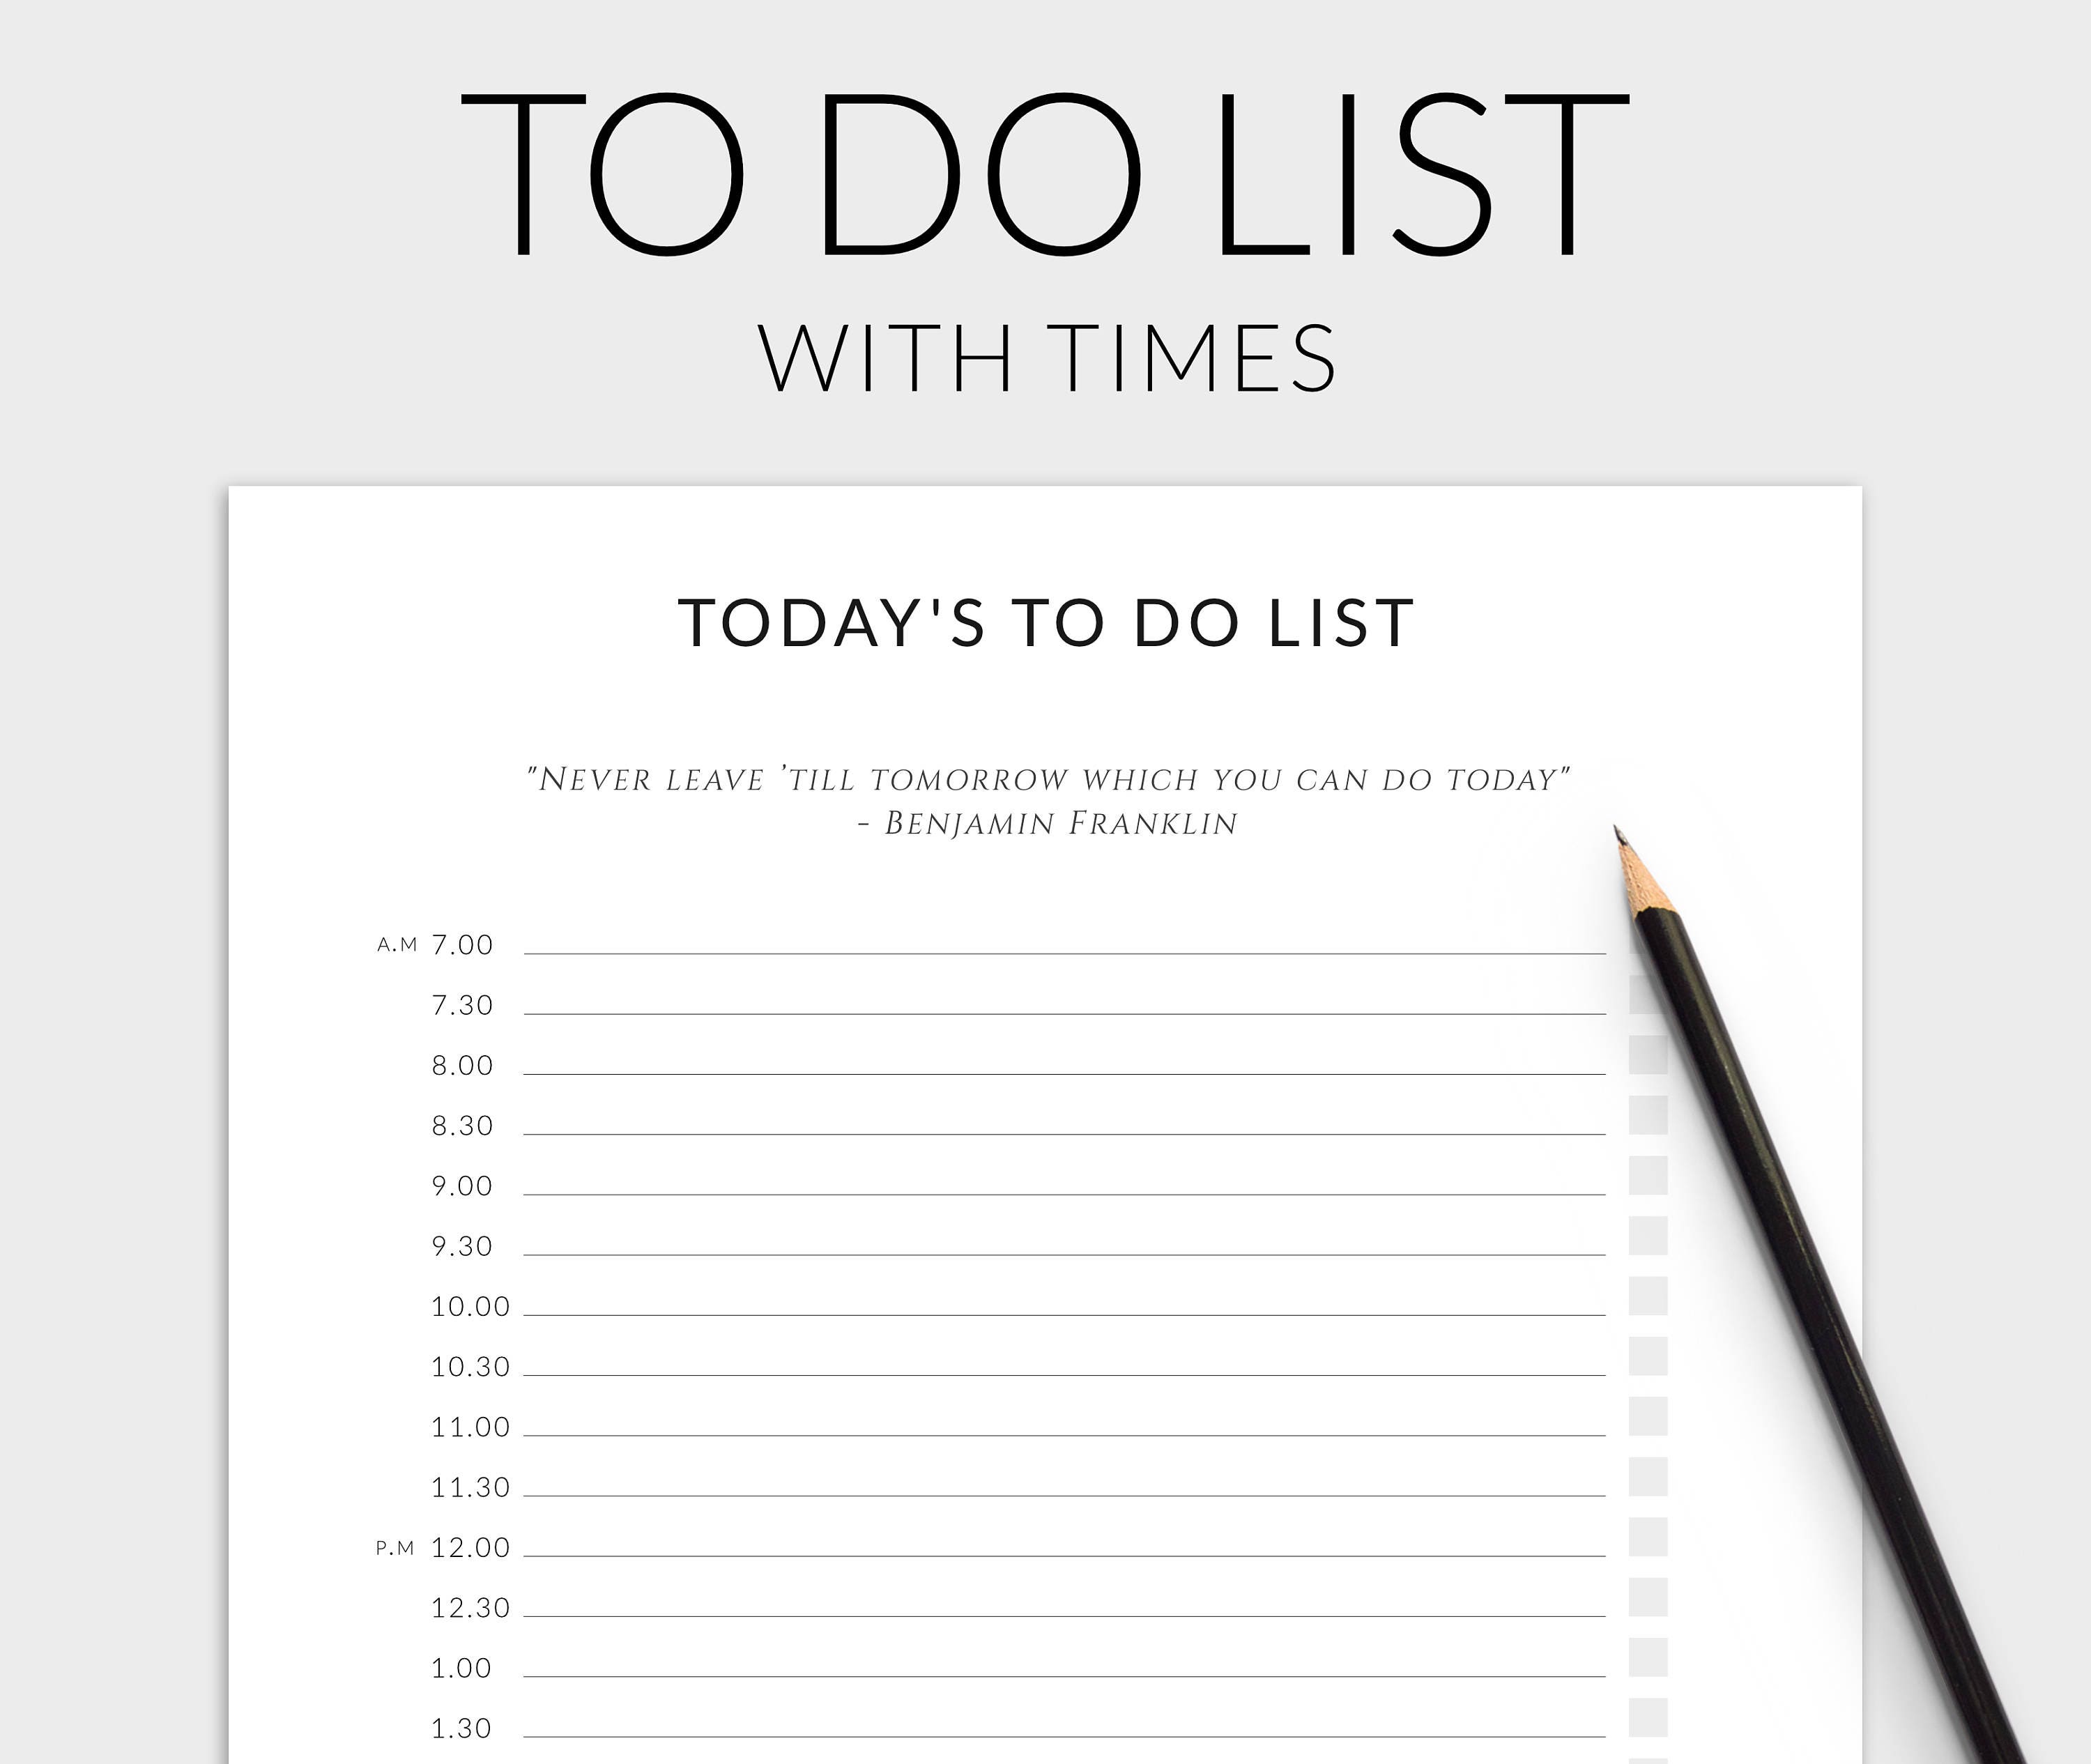 To do list steam фото 65